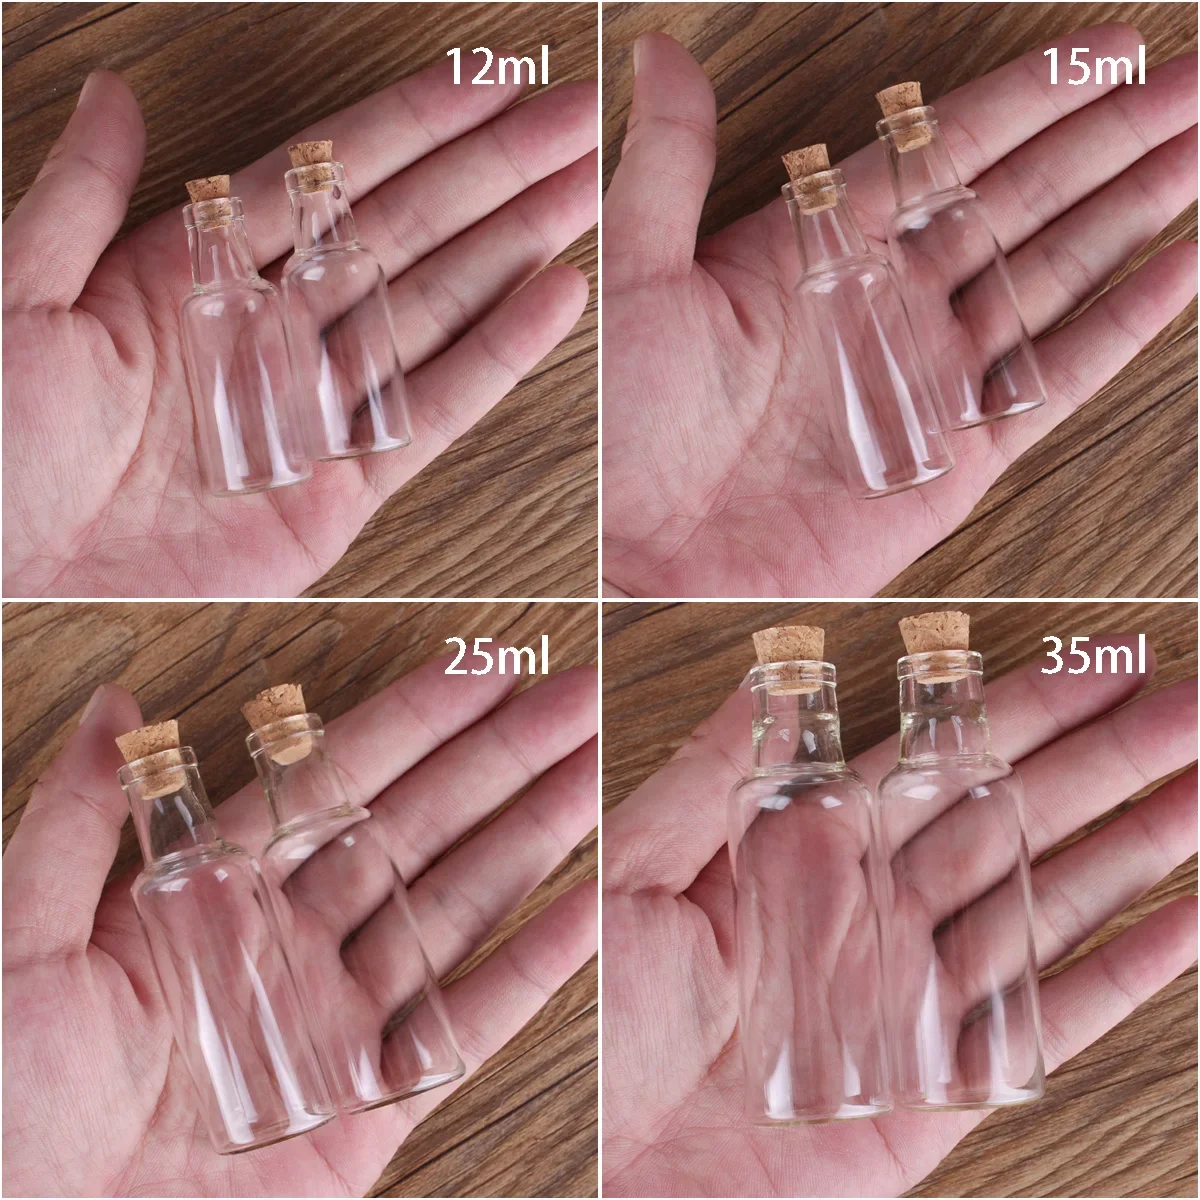 

Bottles Vials Wish With Jars 15ml Cork Glass Stopper 25ml 24pcs Gift Crafts Empty Small Spice 35ml 12ml